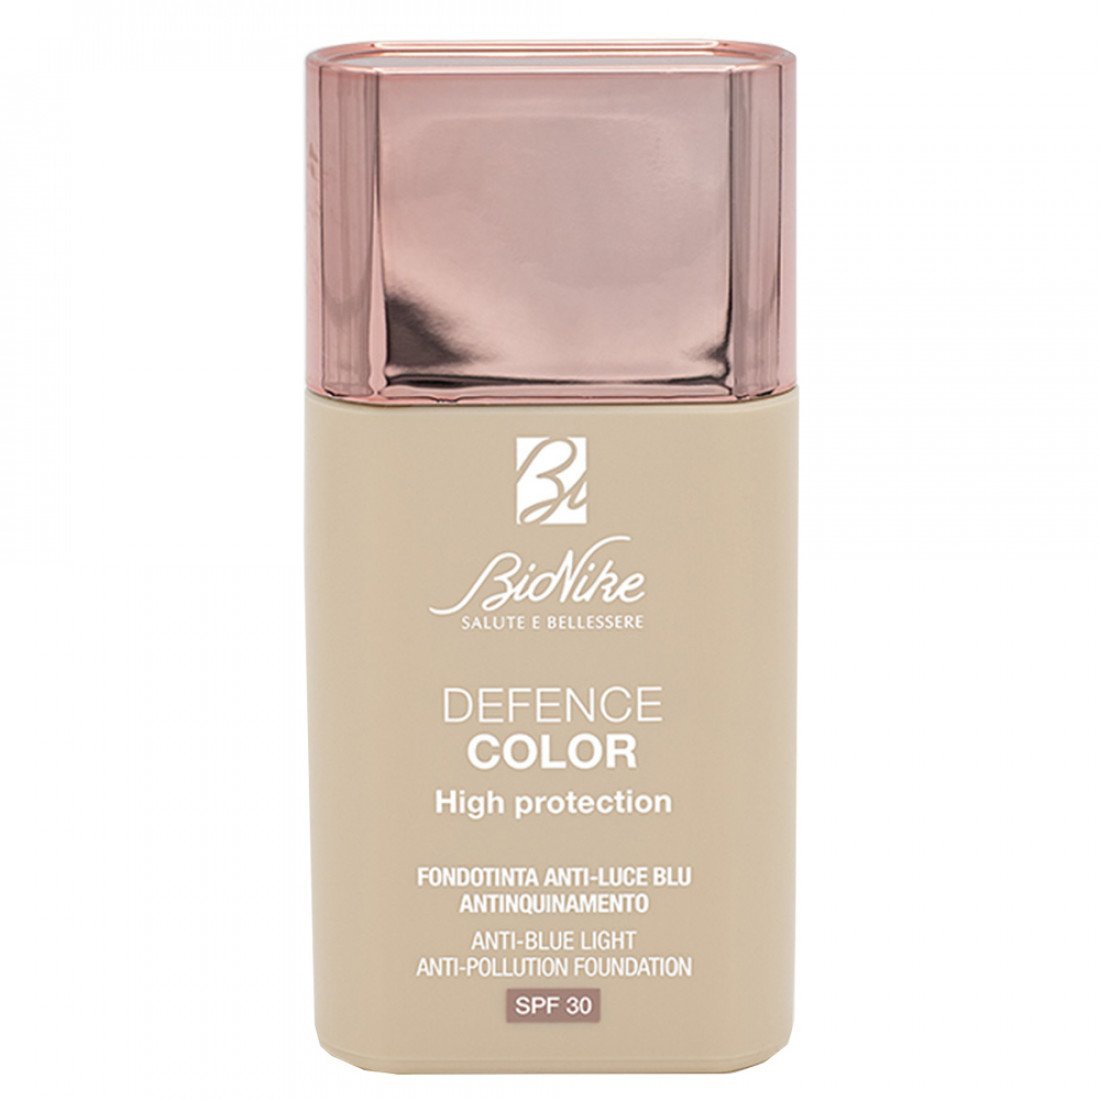 Bionike Defence Color High Protection SPF 30